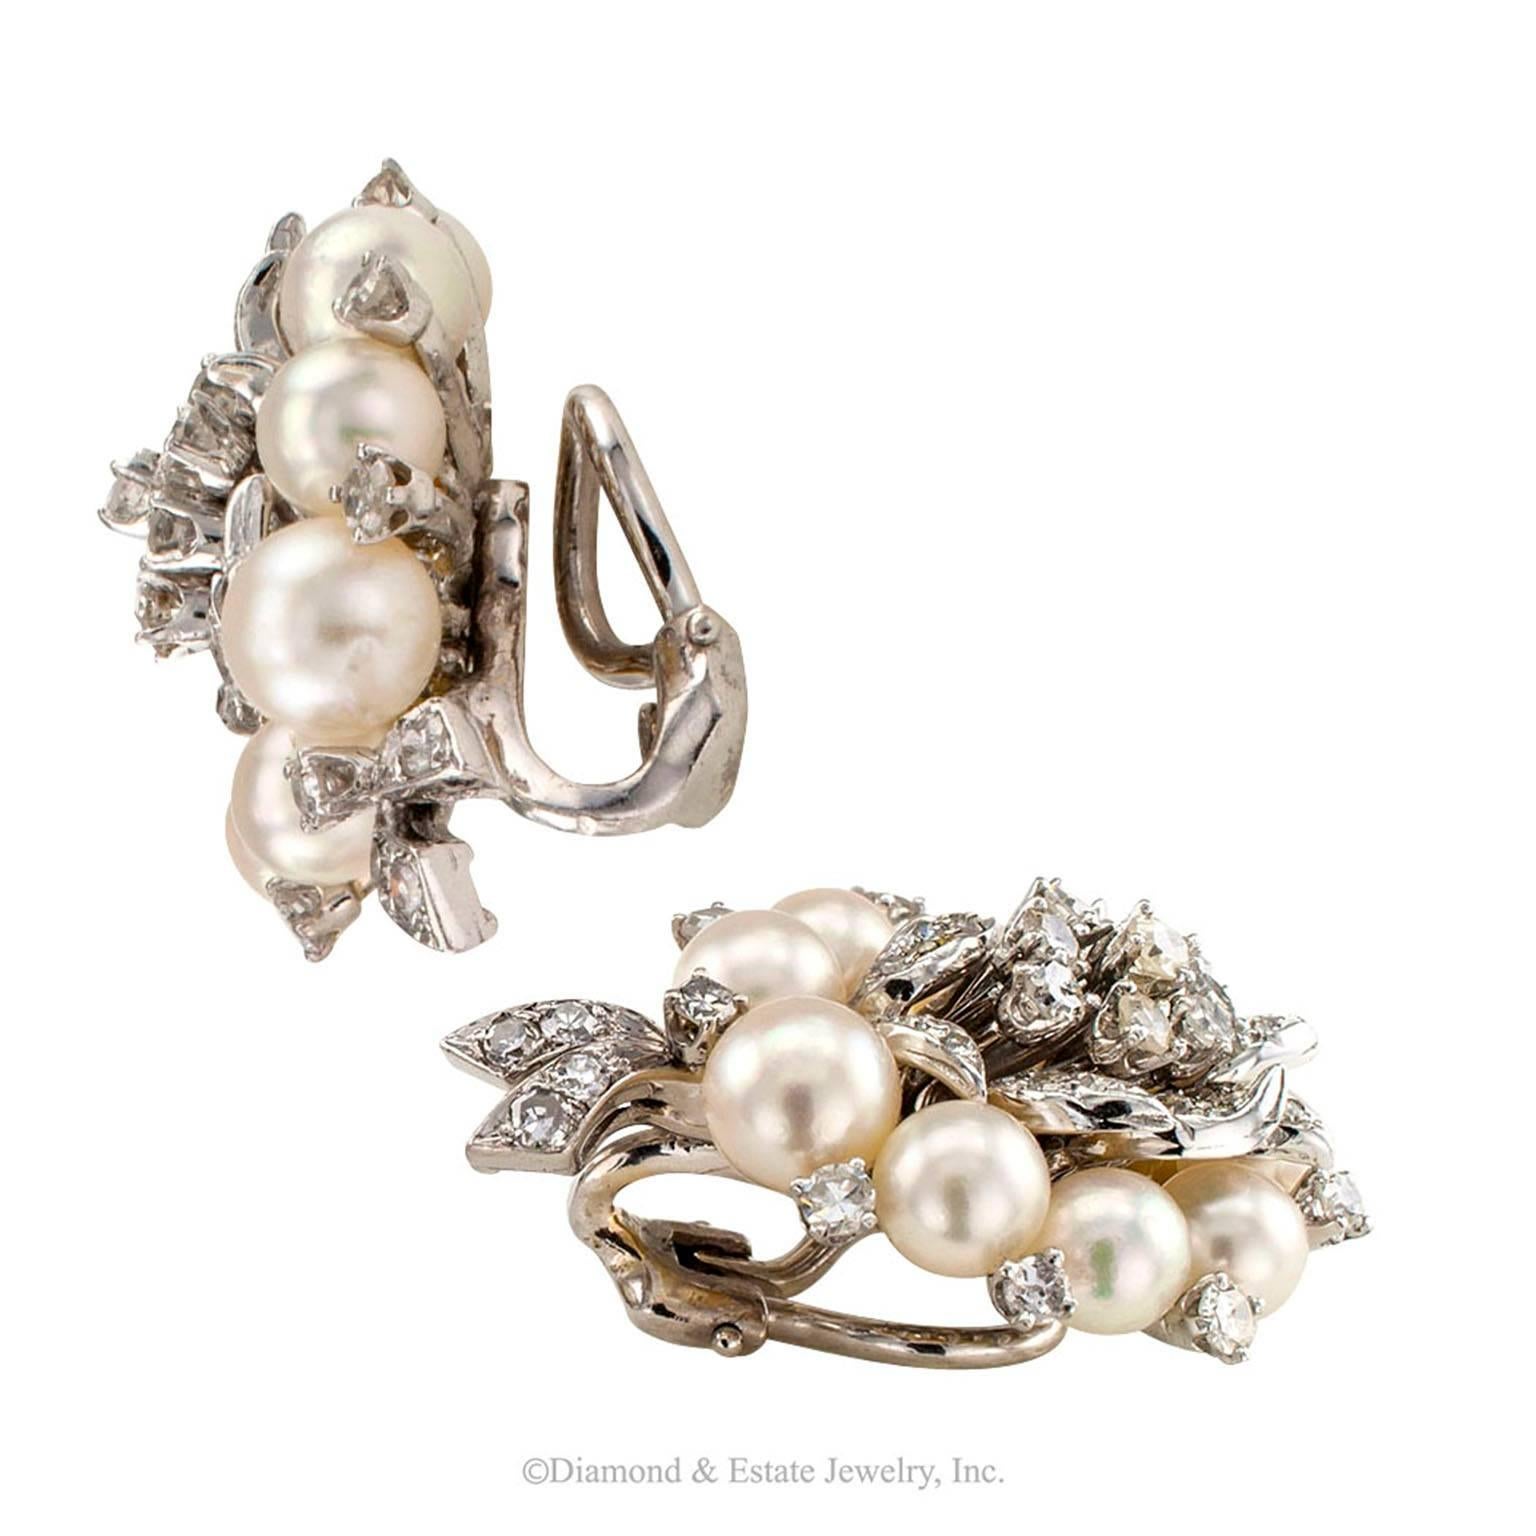 1950s Cultured Pearl Diamond Gold Ear Clips

Mid-century cultured pearl and 2.75 carats diamonds and gold cluster ear clips circa 1950.  The 14-karat white gold designs are a perfect embodiment of the elegant and utterly feminine style of the